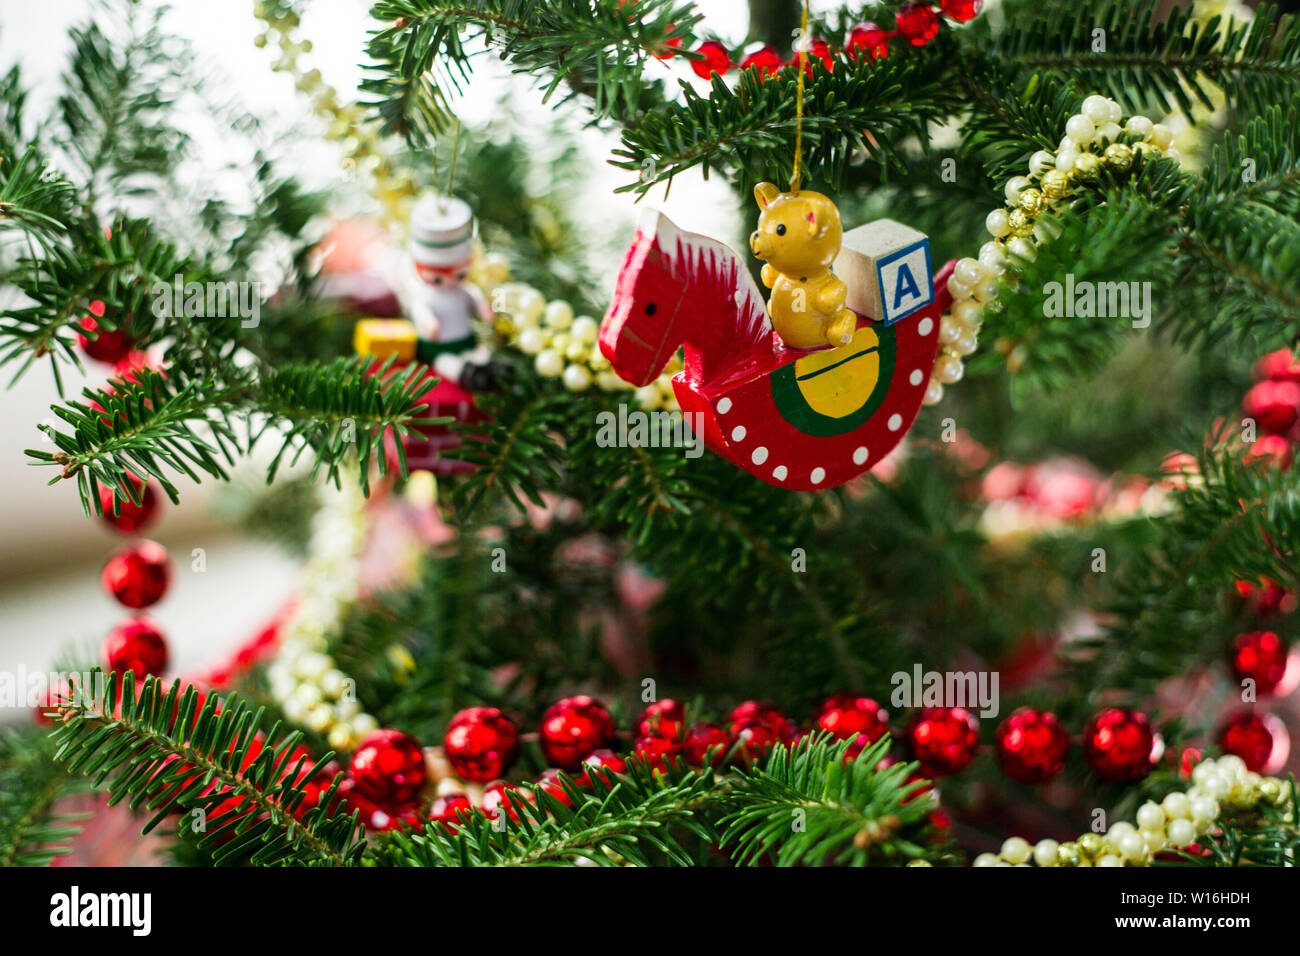 Close up of christmas ornament of red rocking horse with teddy bear and alphabet block hangs on branch of Christmas tree with red and white beaded gar Stock Photo